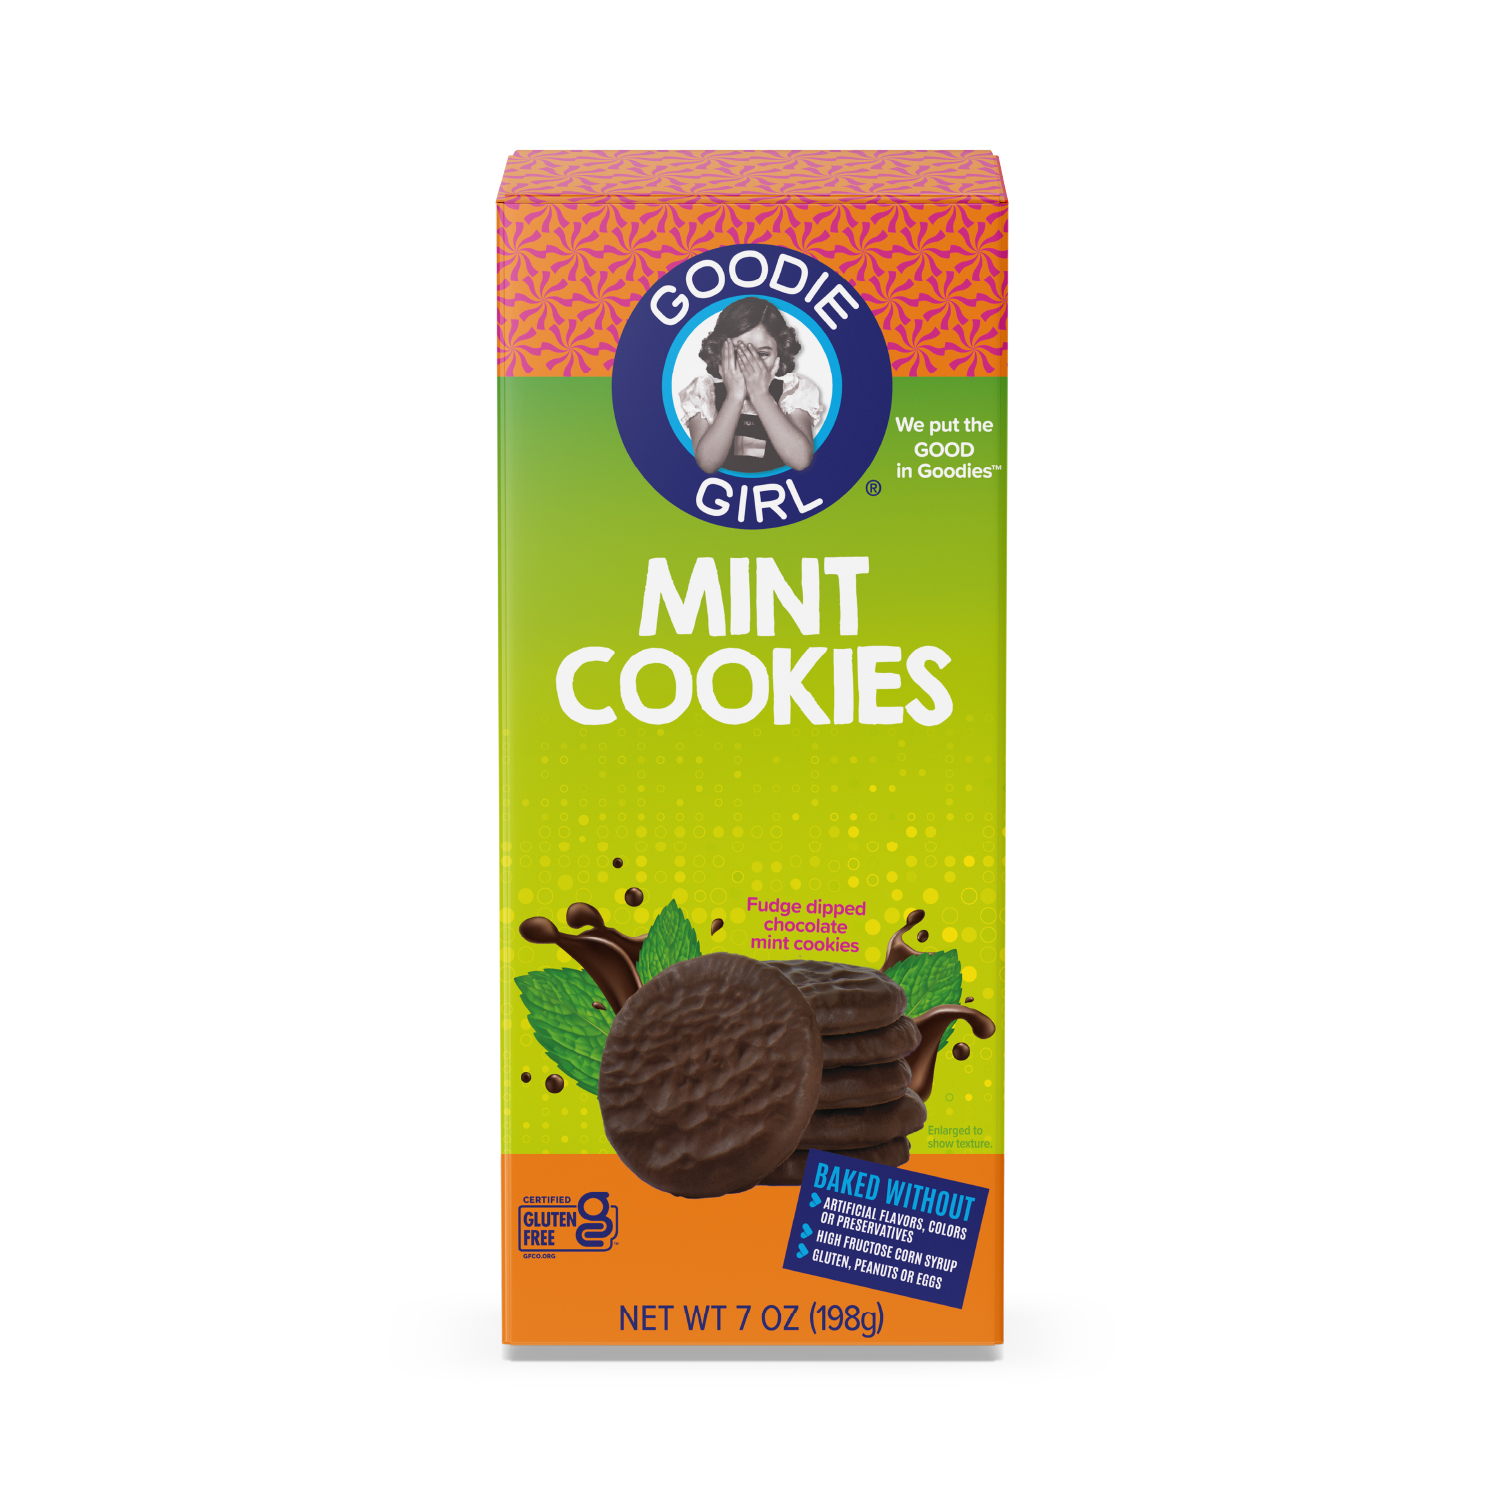 Goodie Girl Mint Cookies, Gluten Free, Shelf Stable, 7 oz Box - image 1 of 10